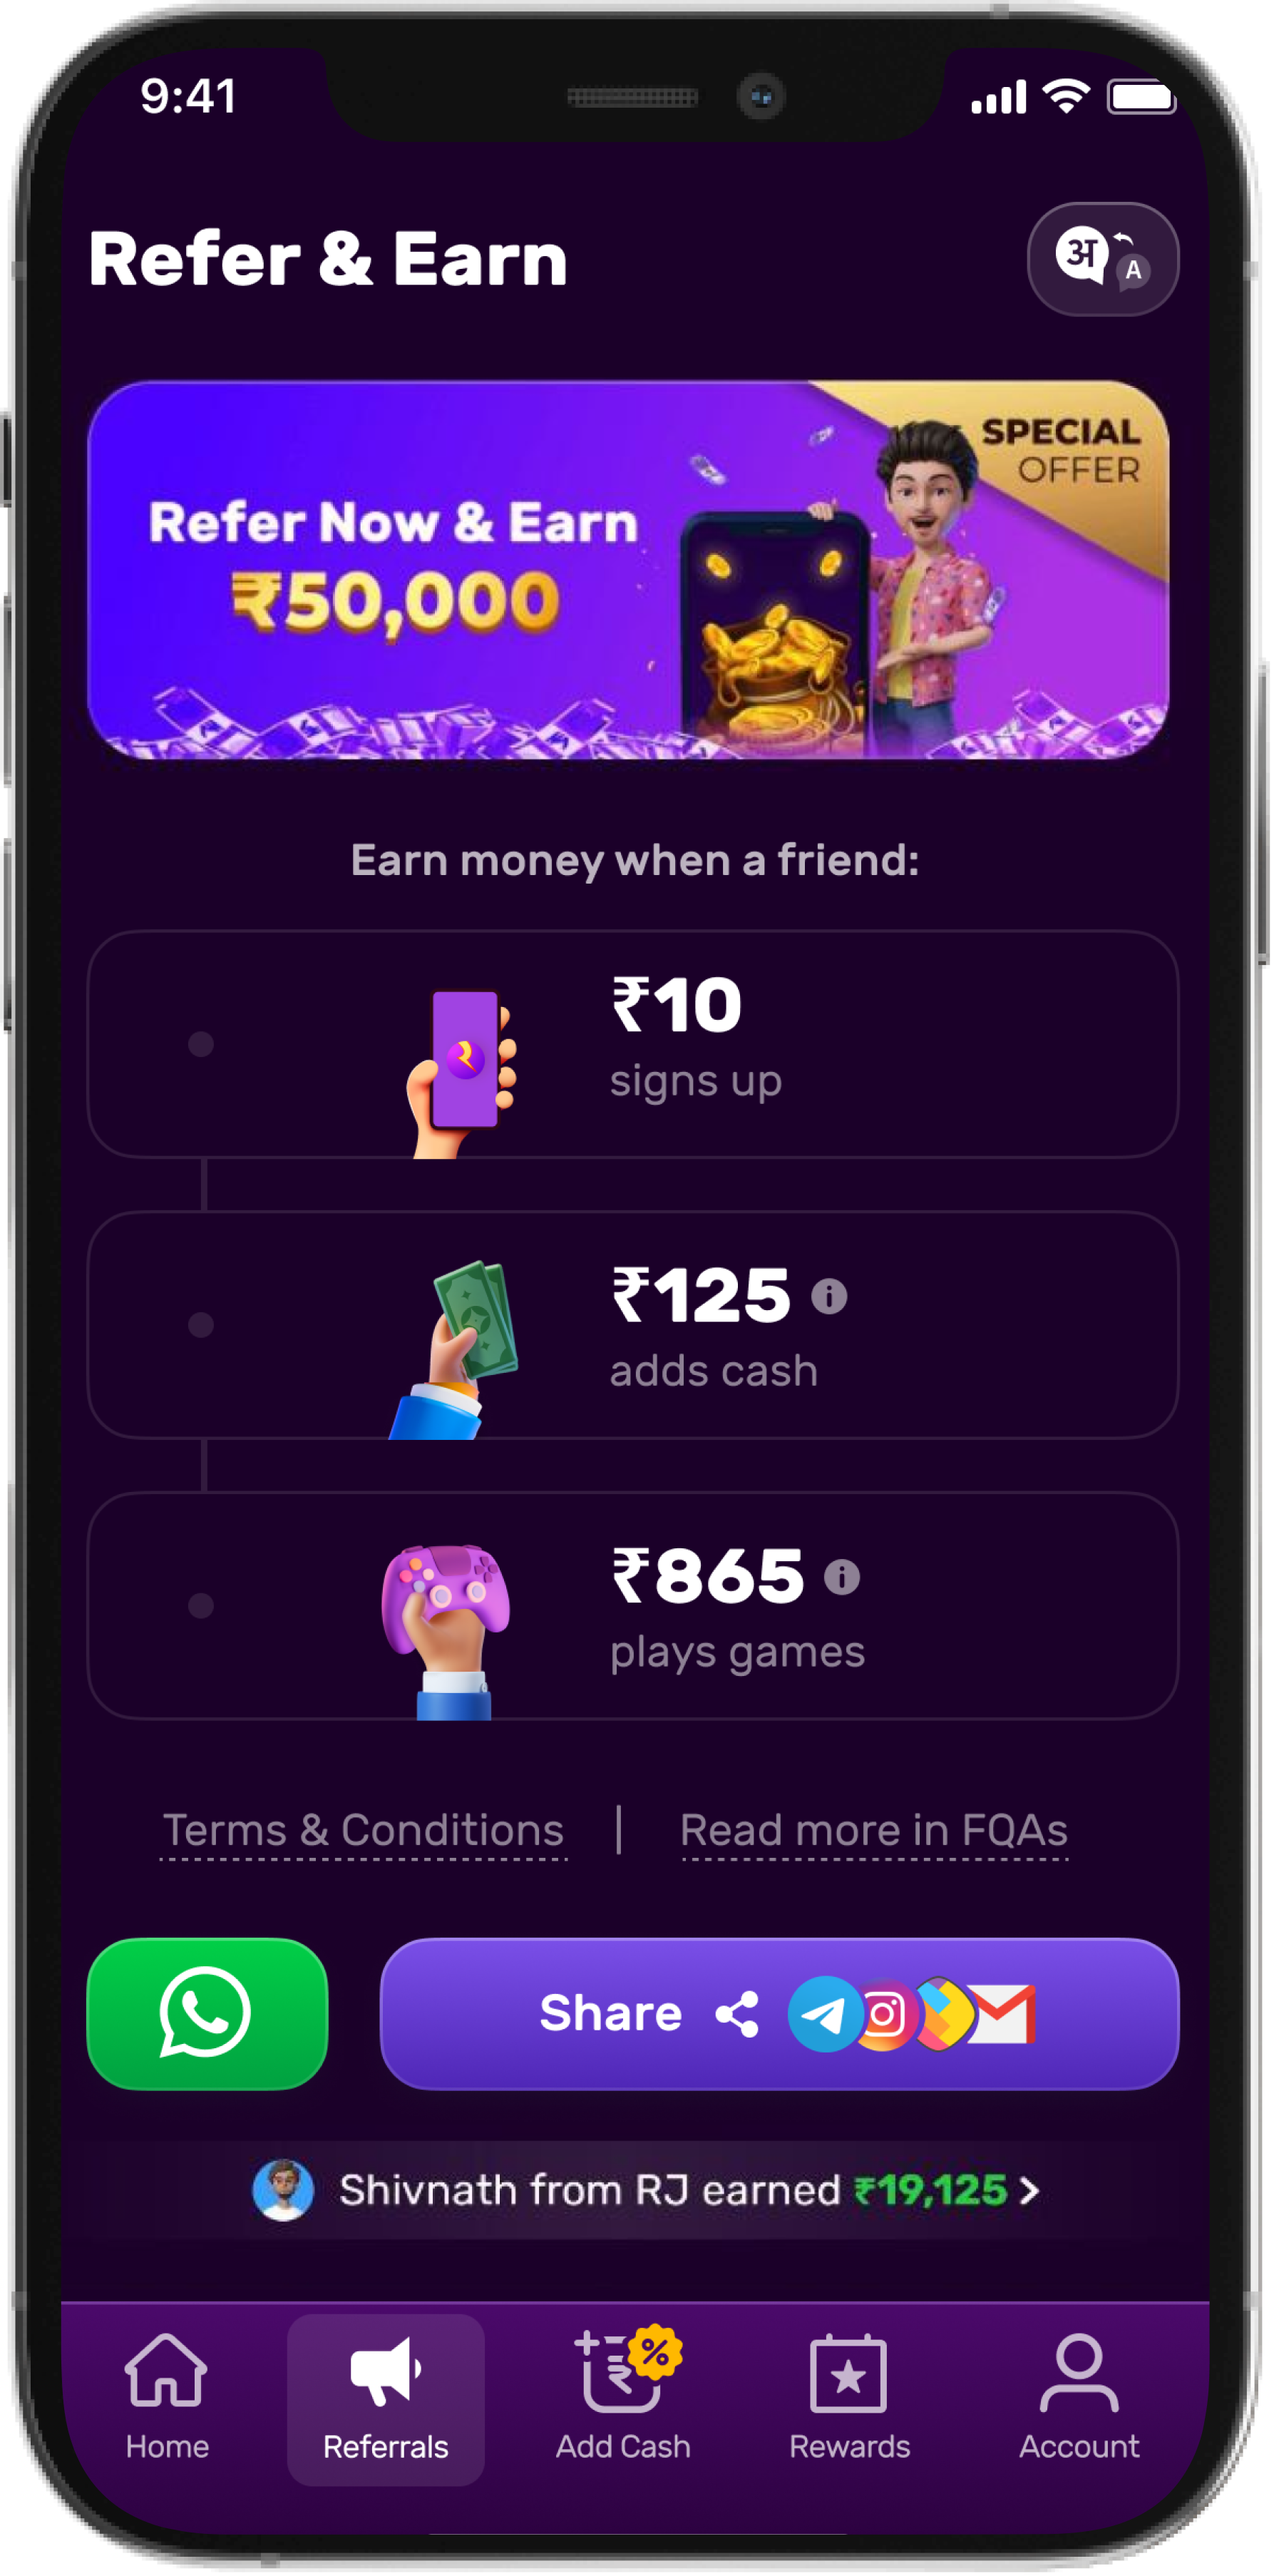 25 Refer and Earn Apps March | Top Invite & Earn Apps